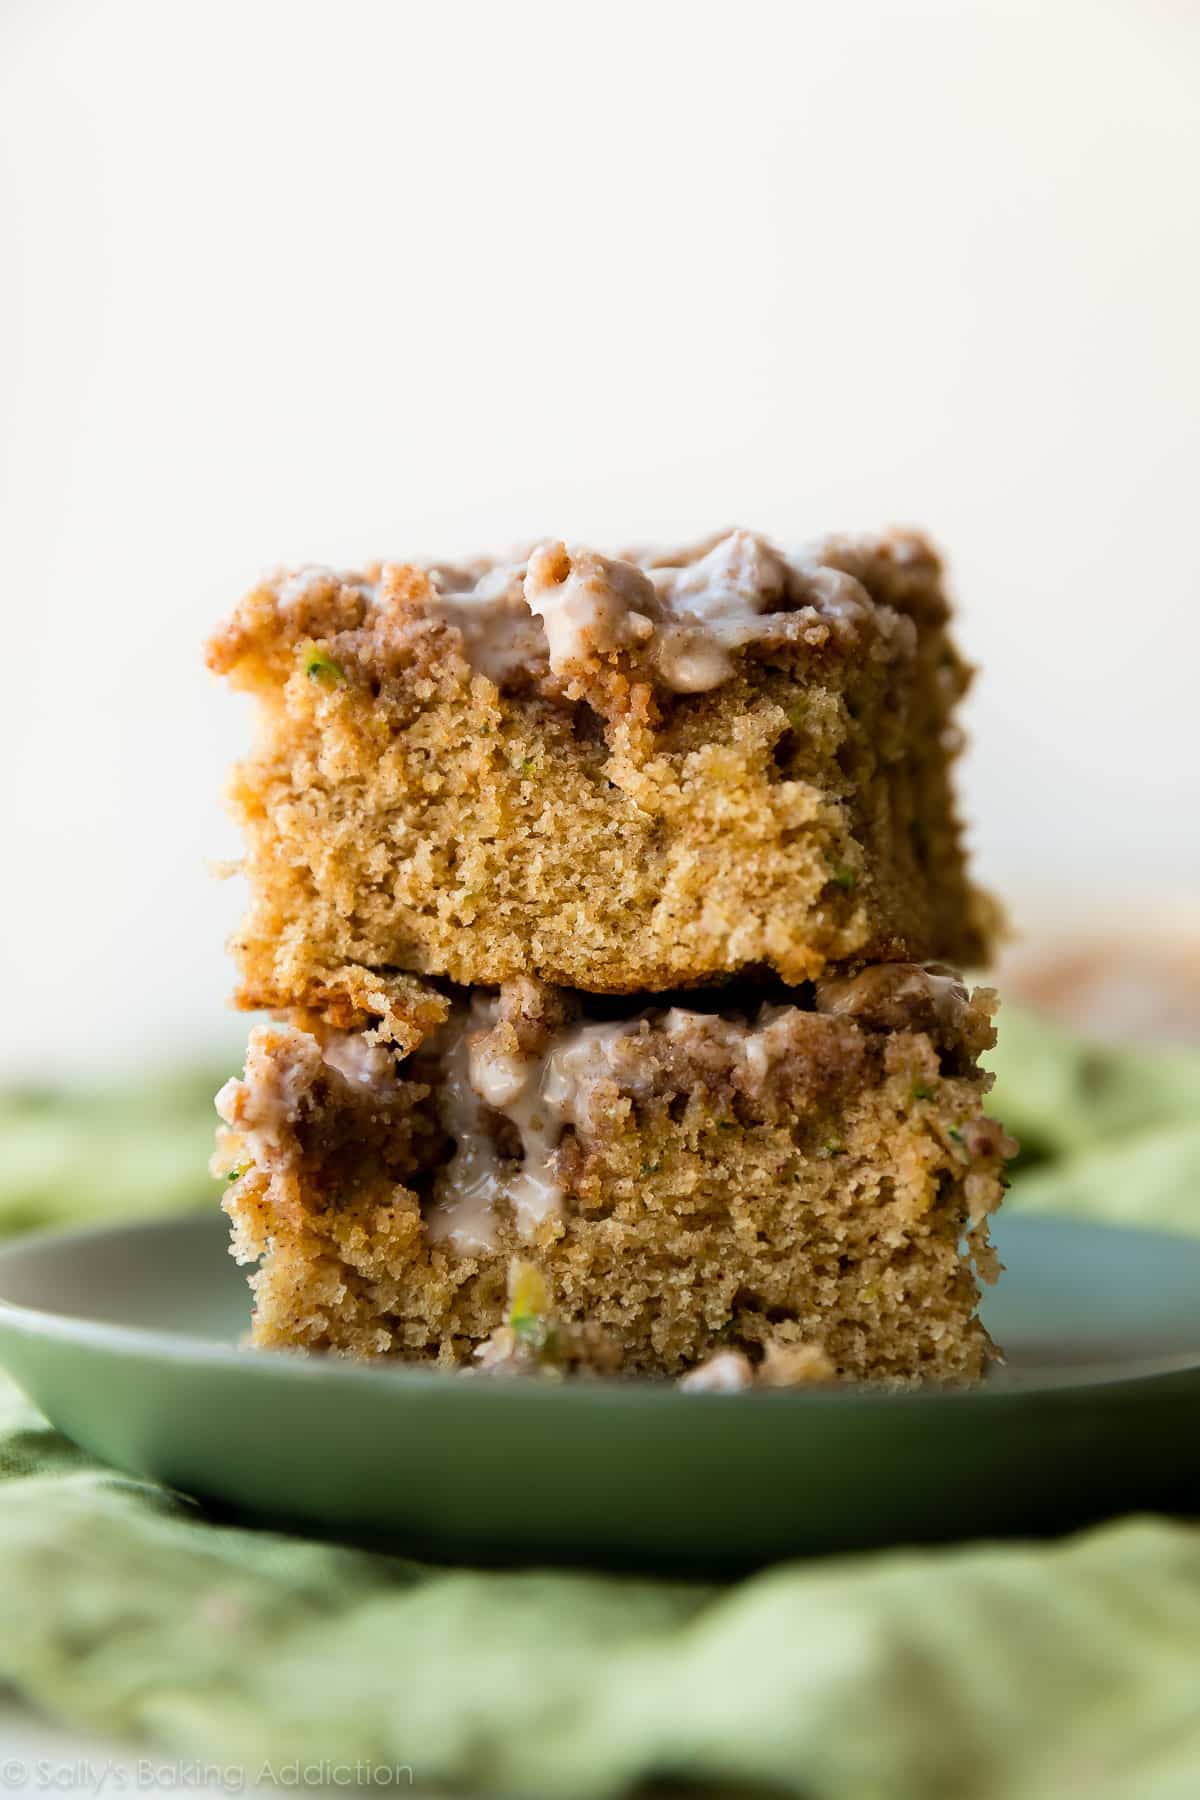 stack of 2 zucchini crumb cake pieces on a green plate